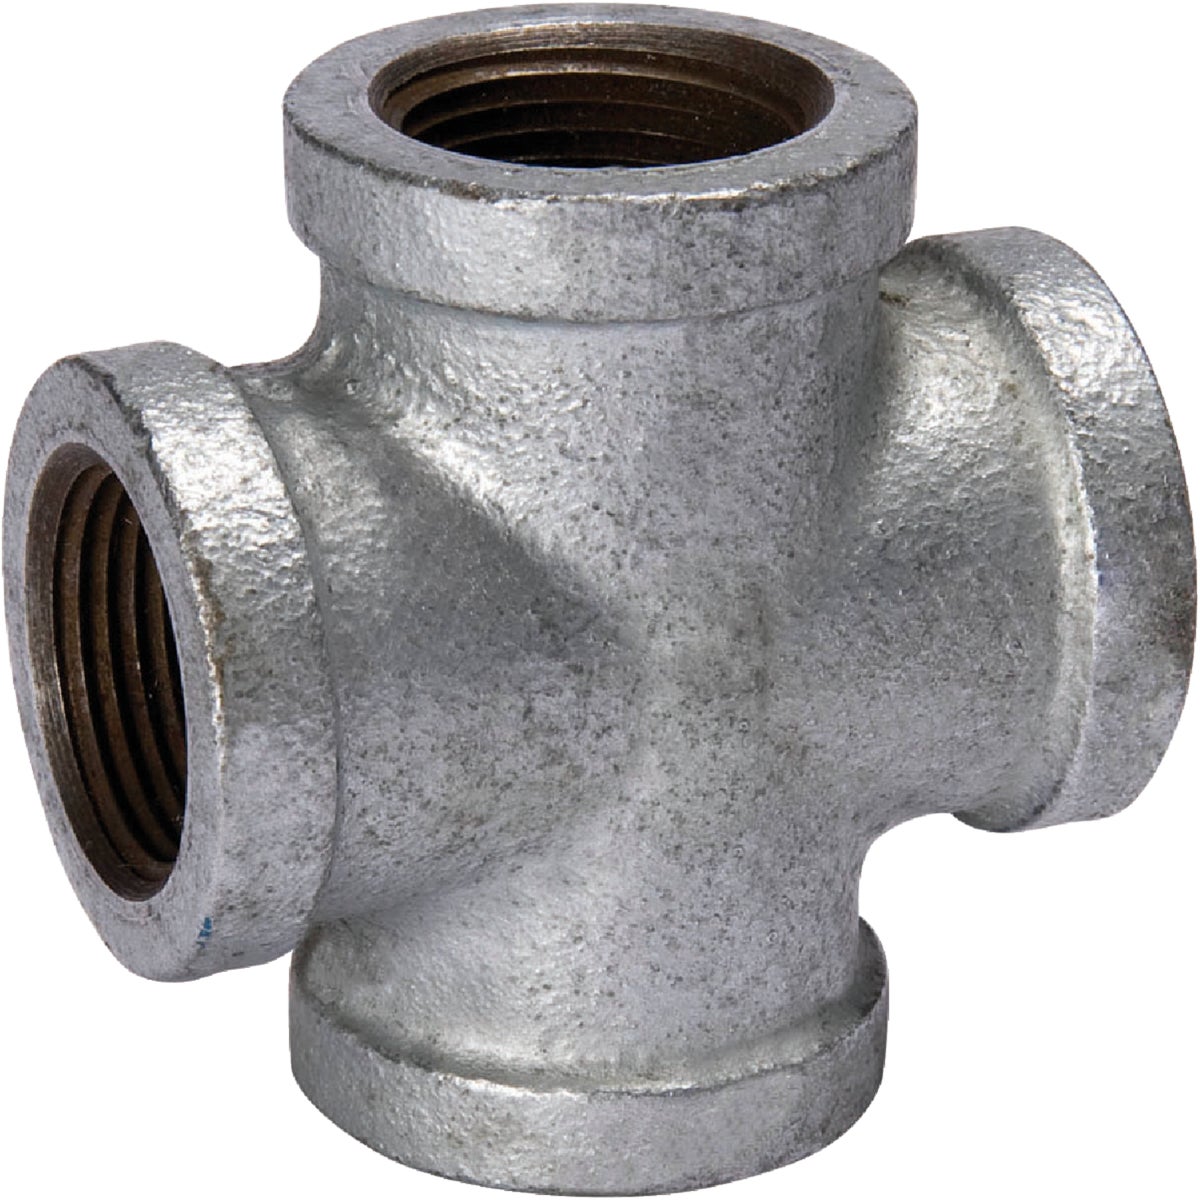 Southland 1 In. Malleable Iron Galvanized Pipe Cross